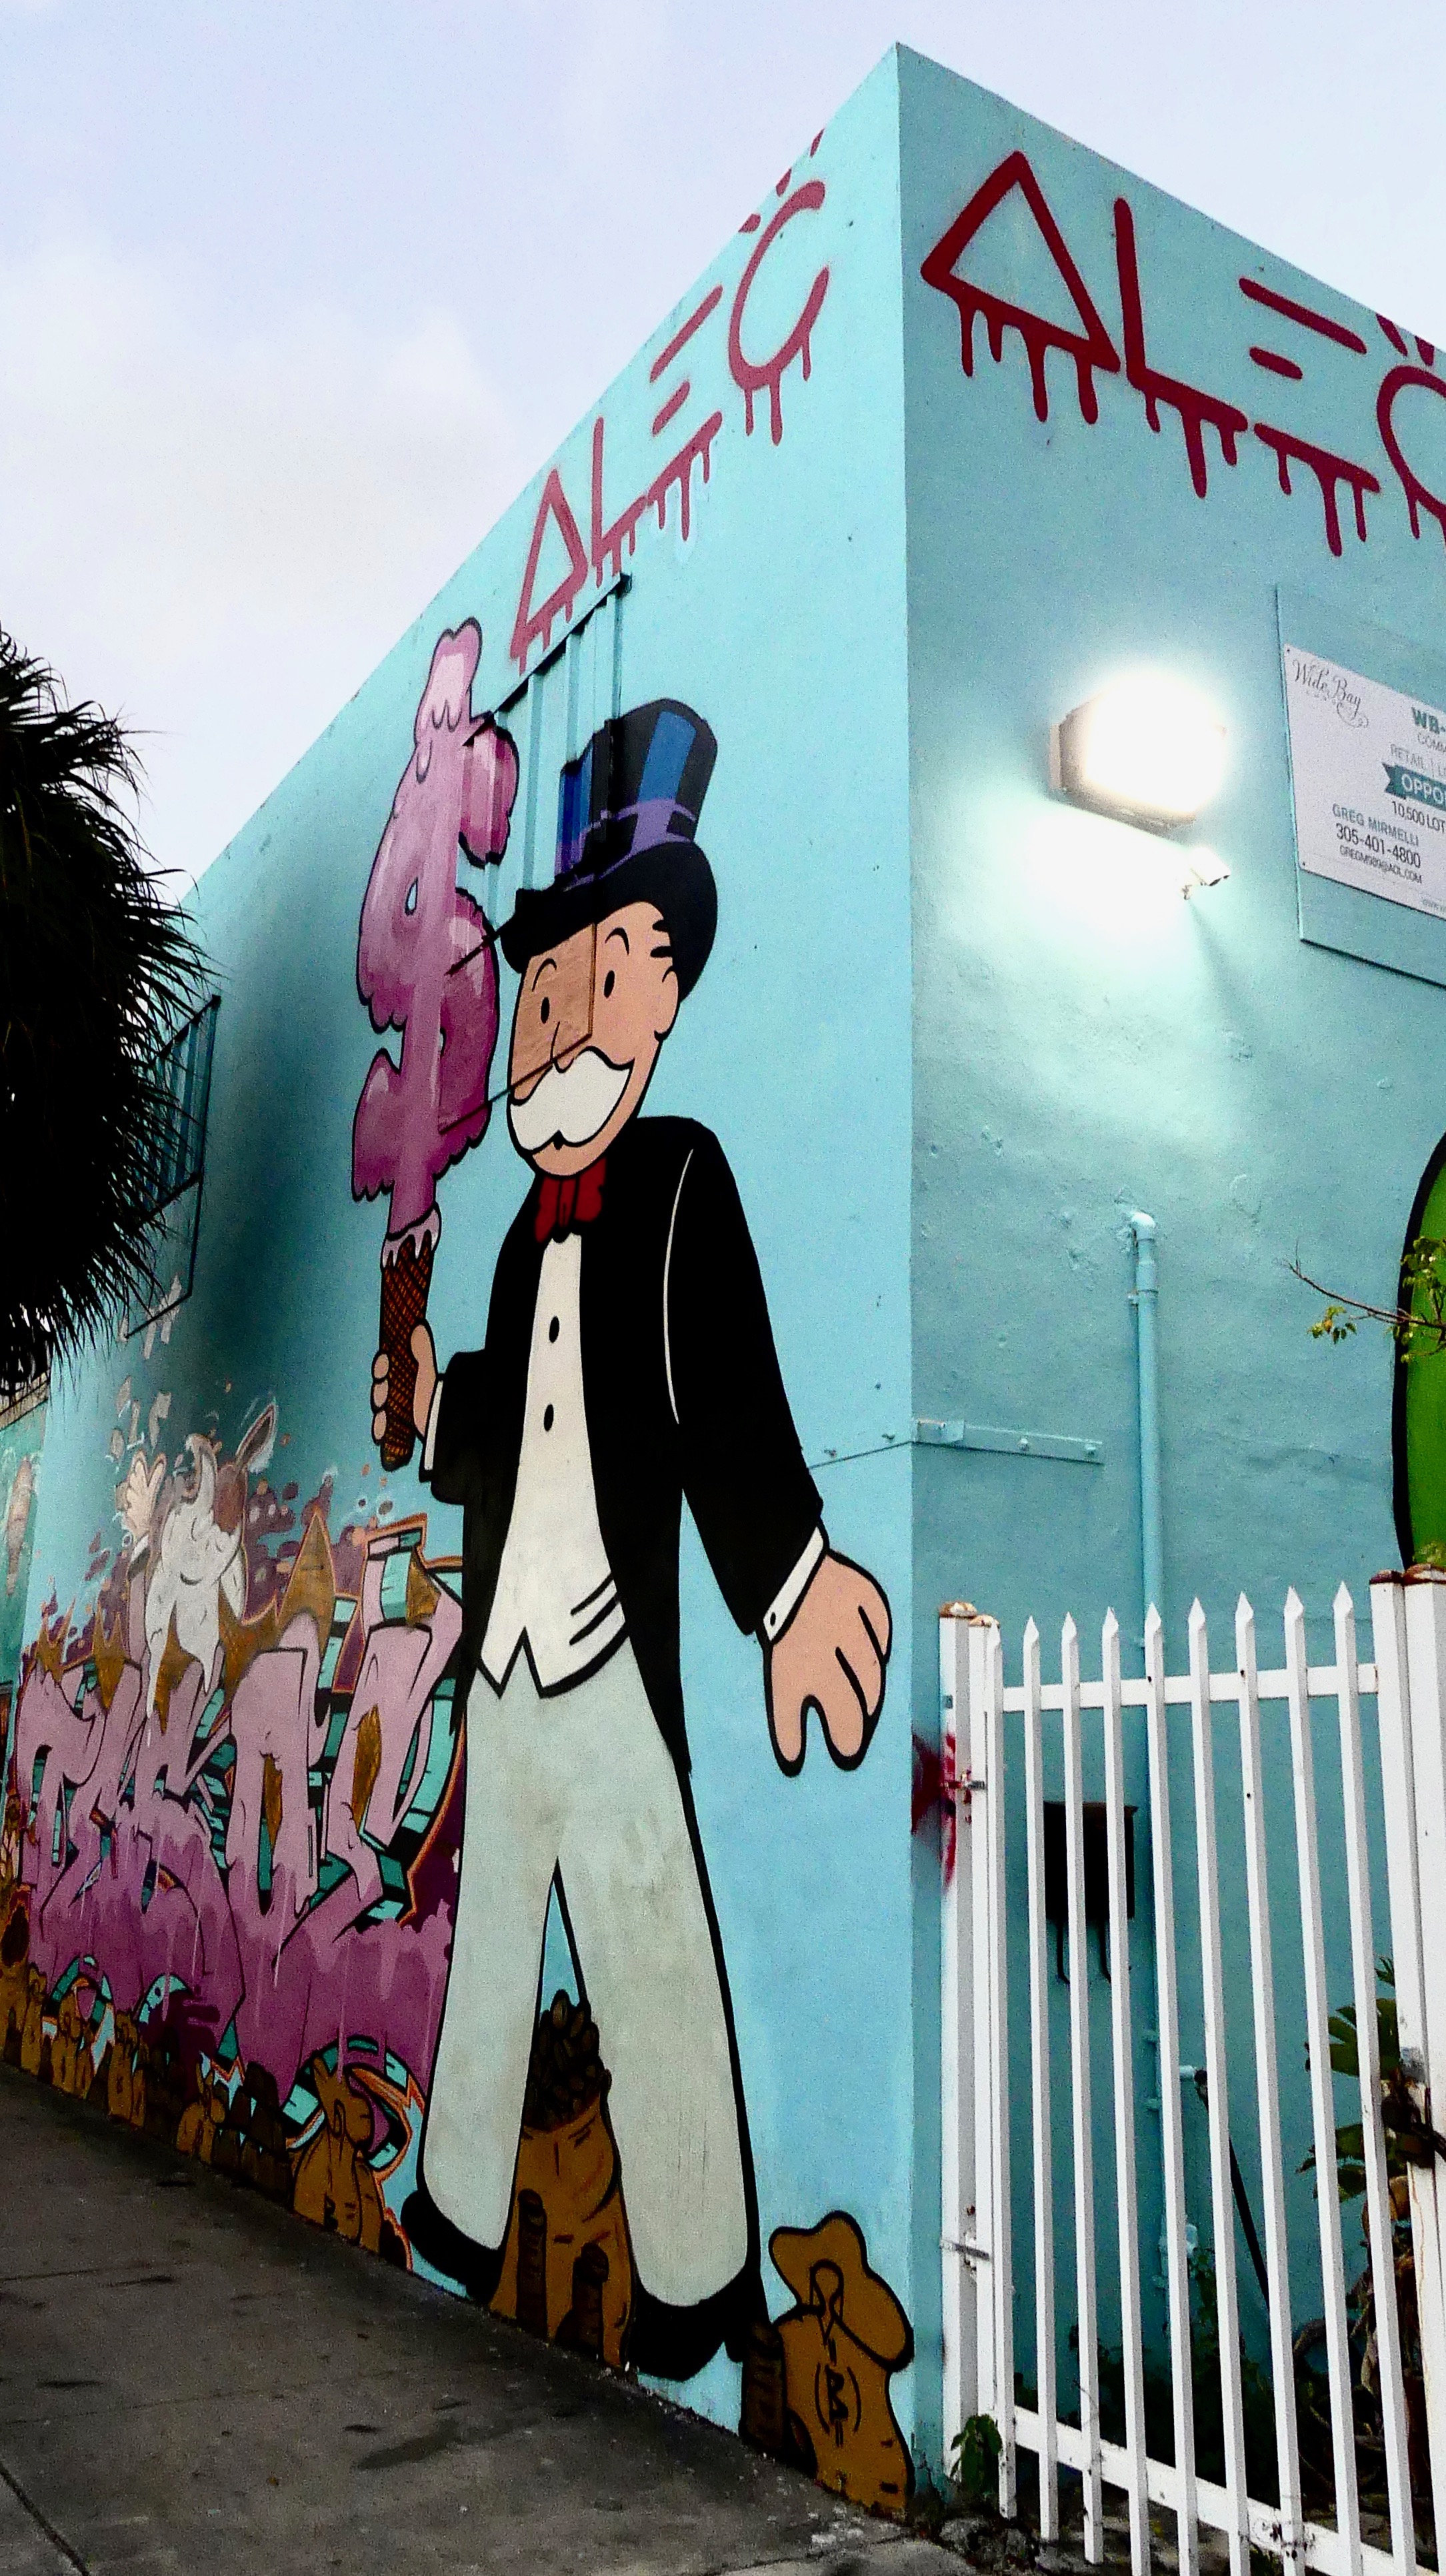 Alec Monopoly pays homage to Virgil Abloh with another mural in Wynwood,  Miami — Beyond Square Footage